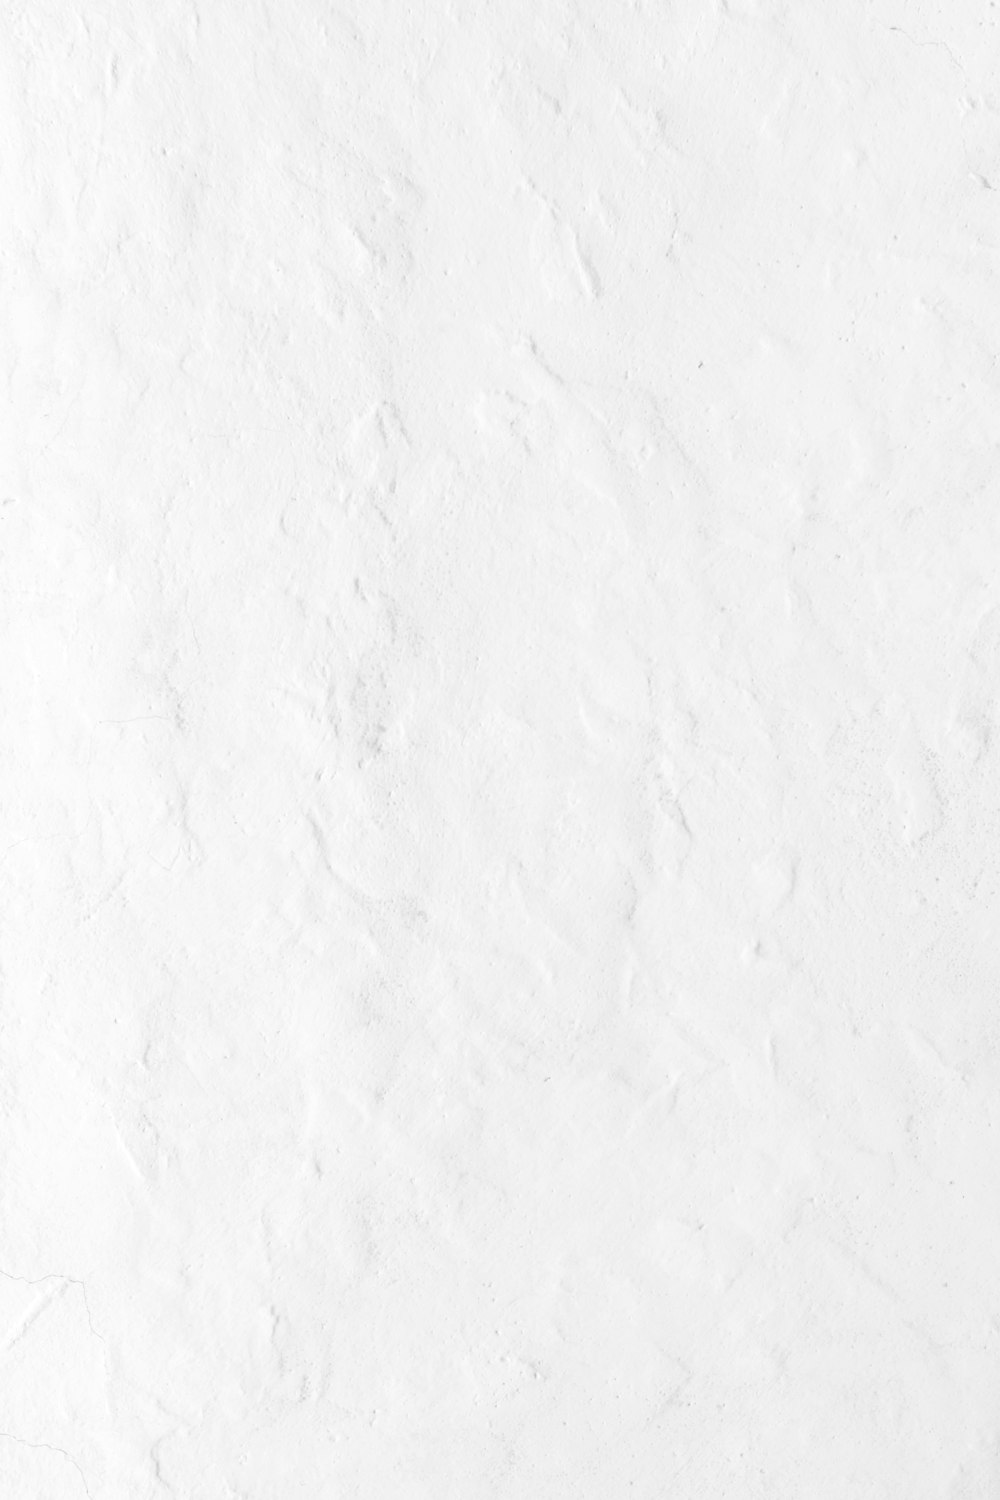 White Paper Texture Stock Photos, Images and Backgrounds for Free Download